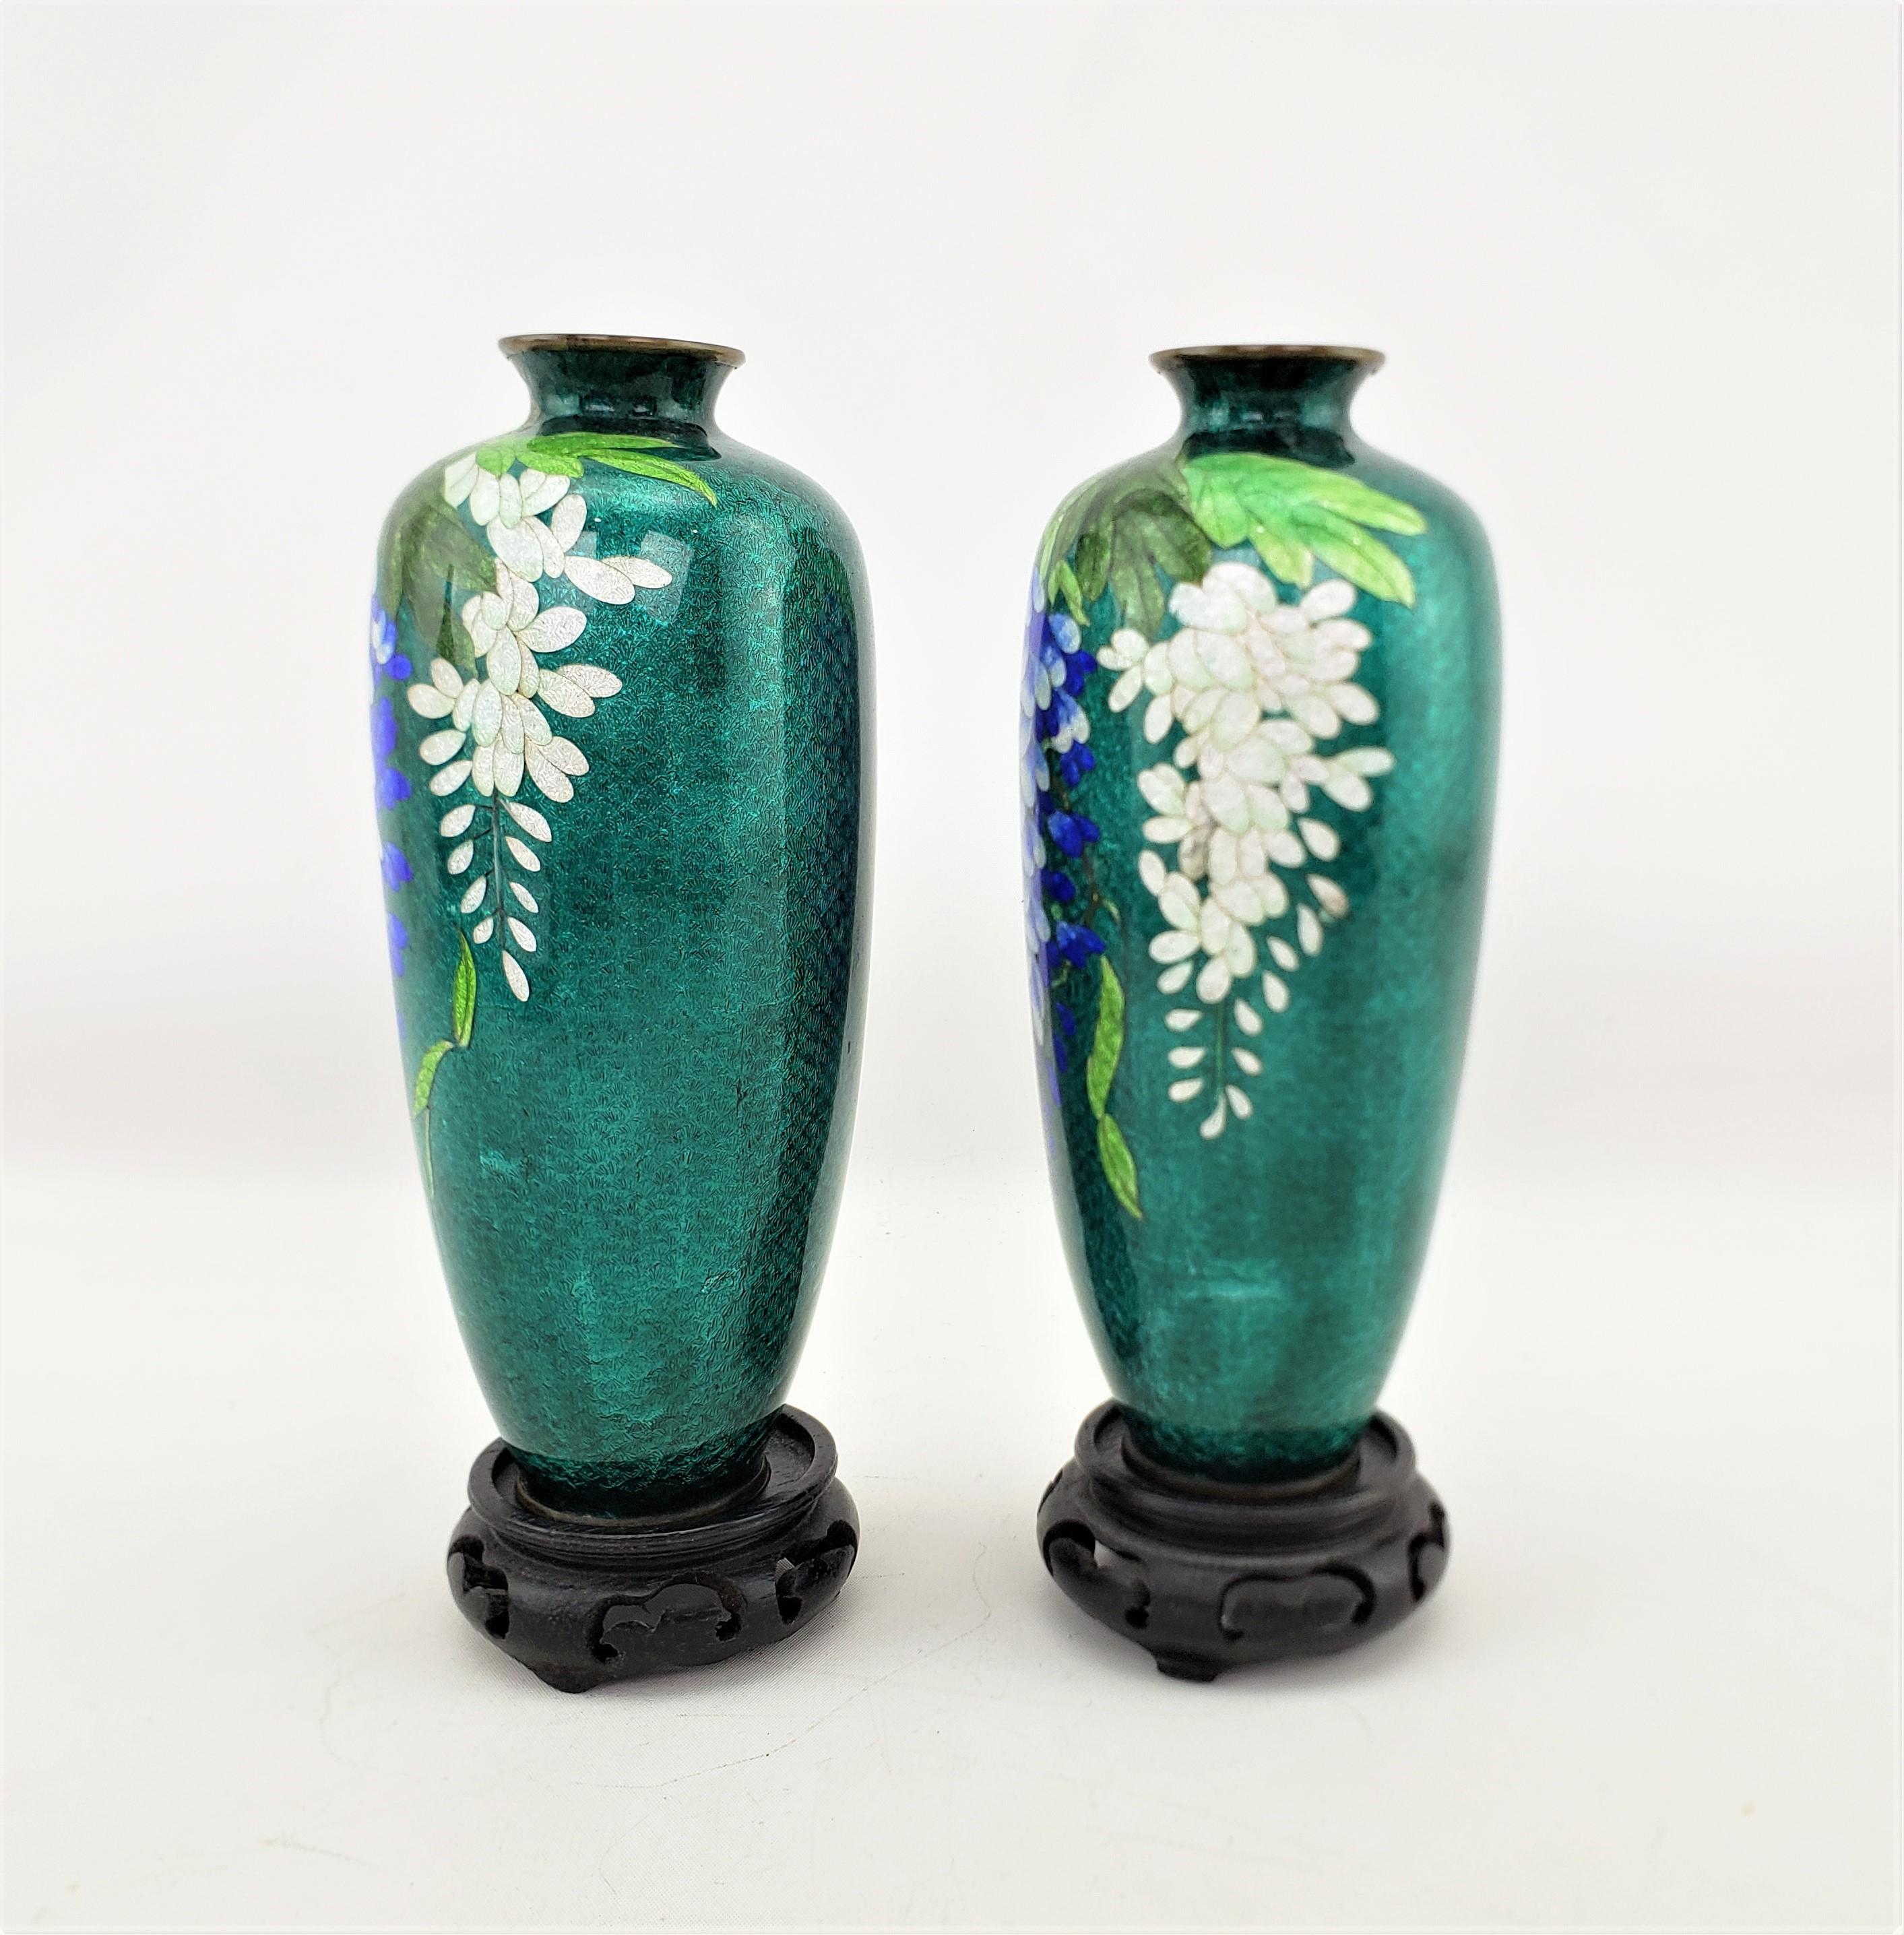 Pair of Antique Japanese Cloisonne Vases with Floral Decoration & Wooden Stands In Good Condition For Sale In Hamilton, Ontario